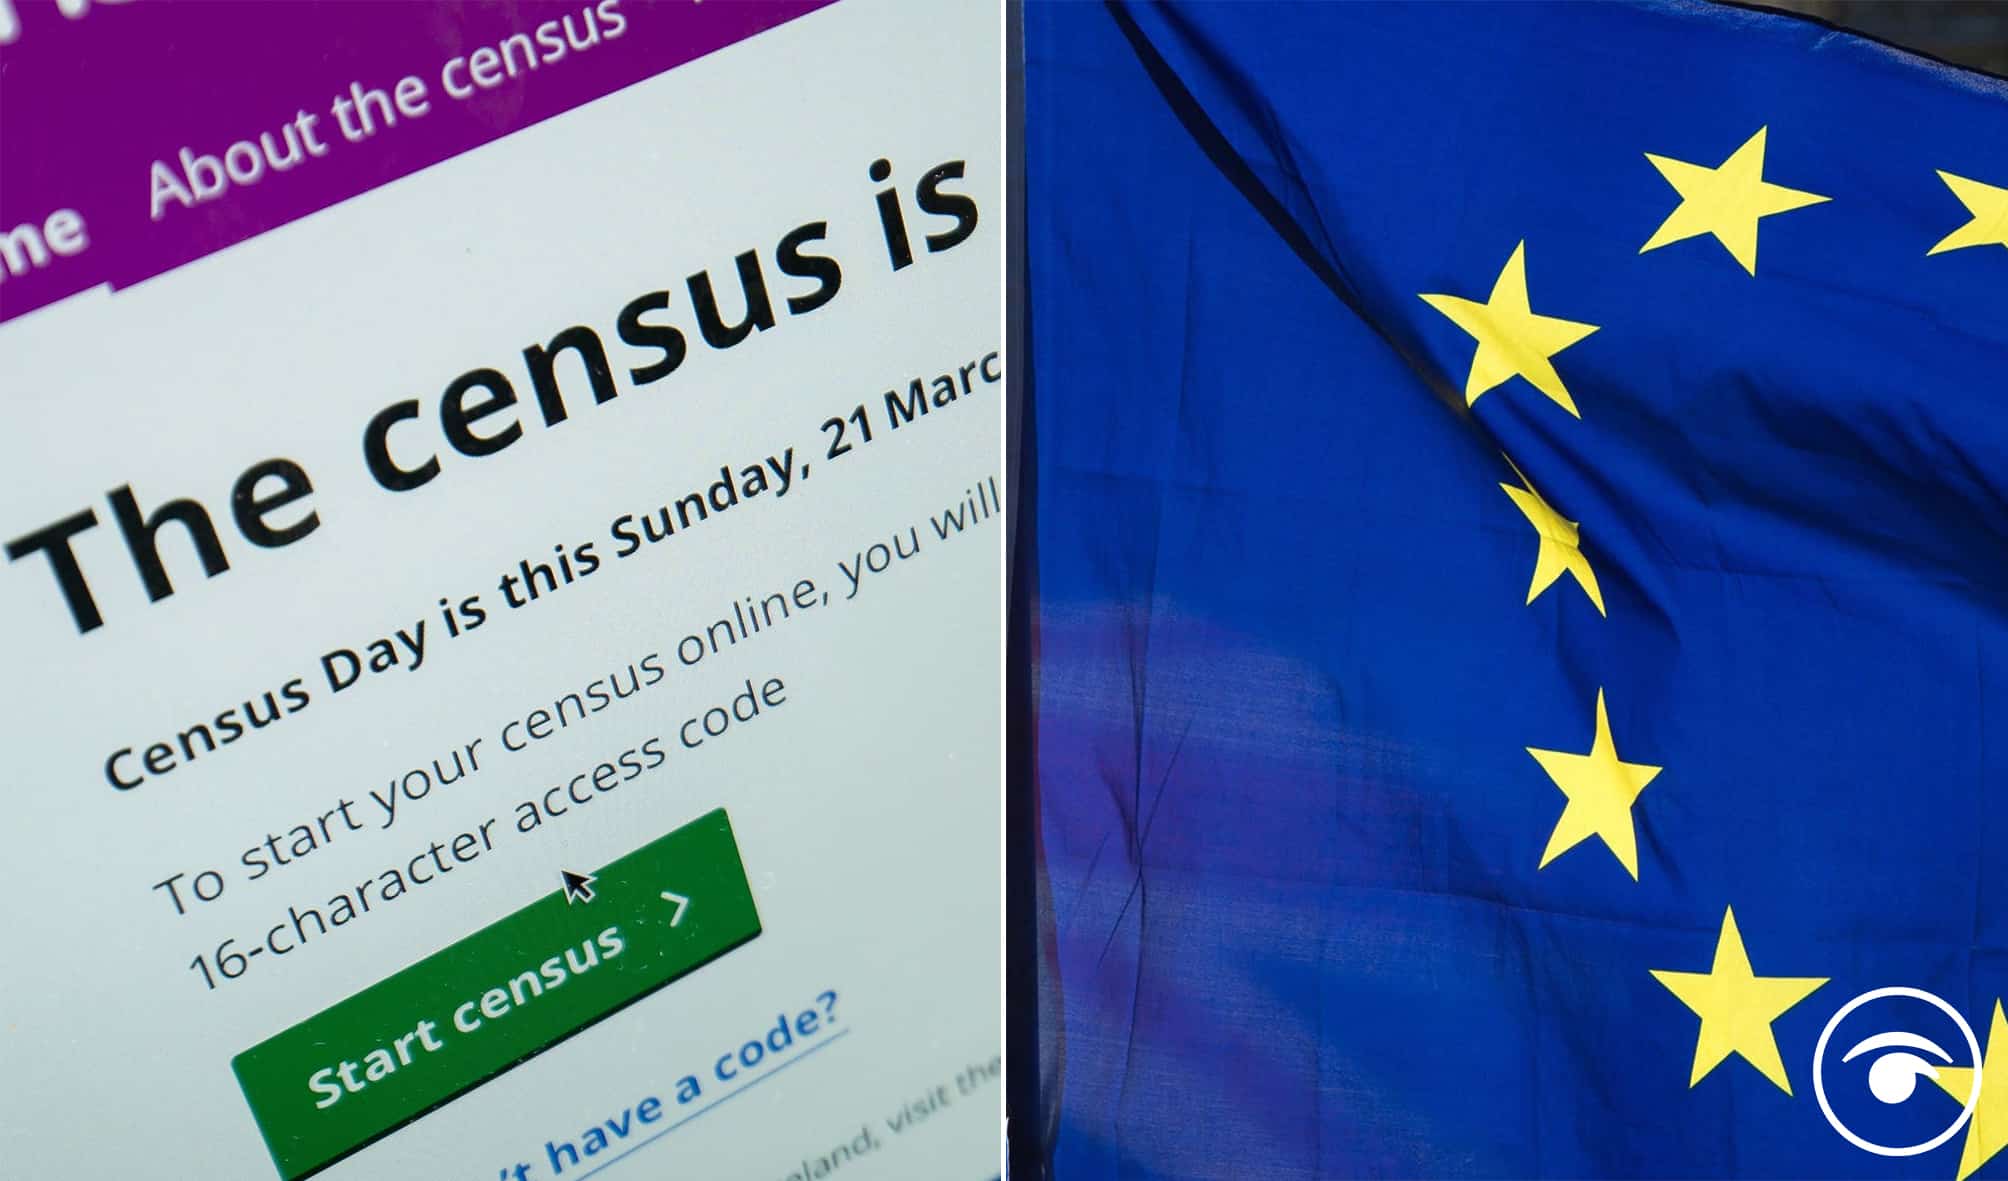 Census day: Campaign urges Brits to declare themselves ‘European’